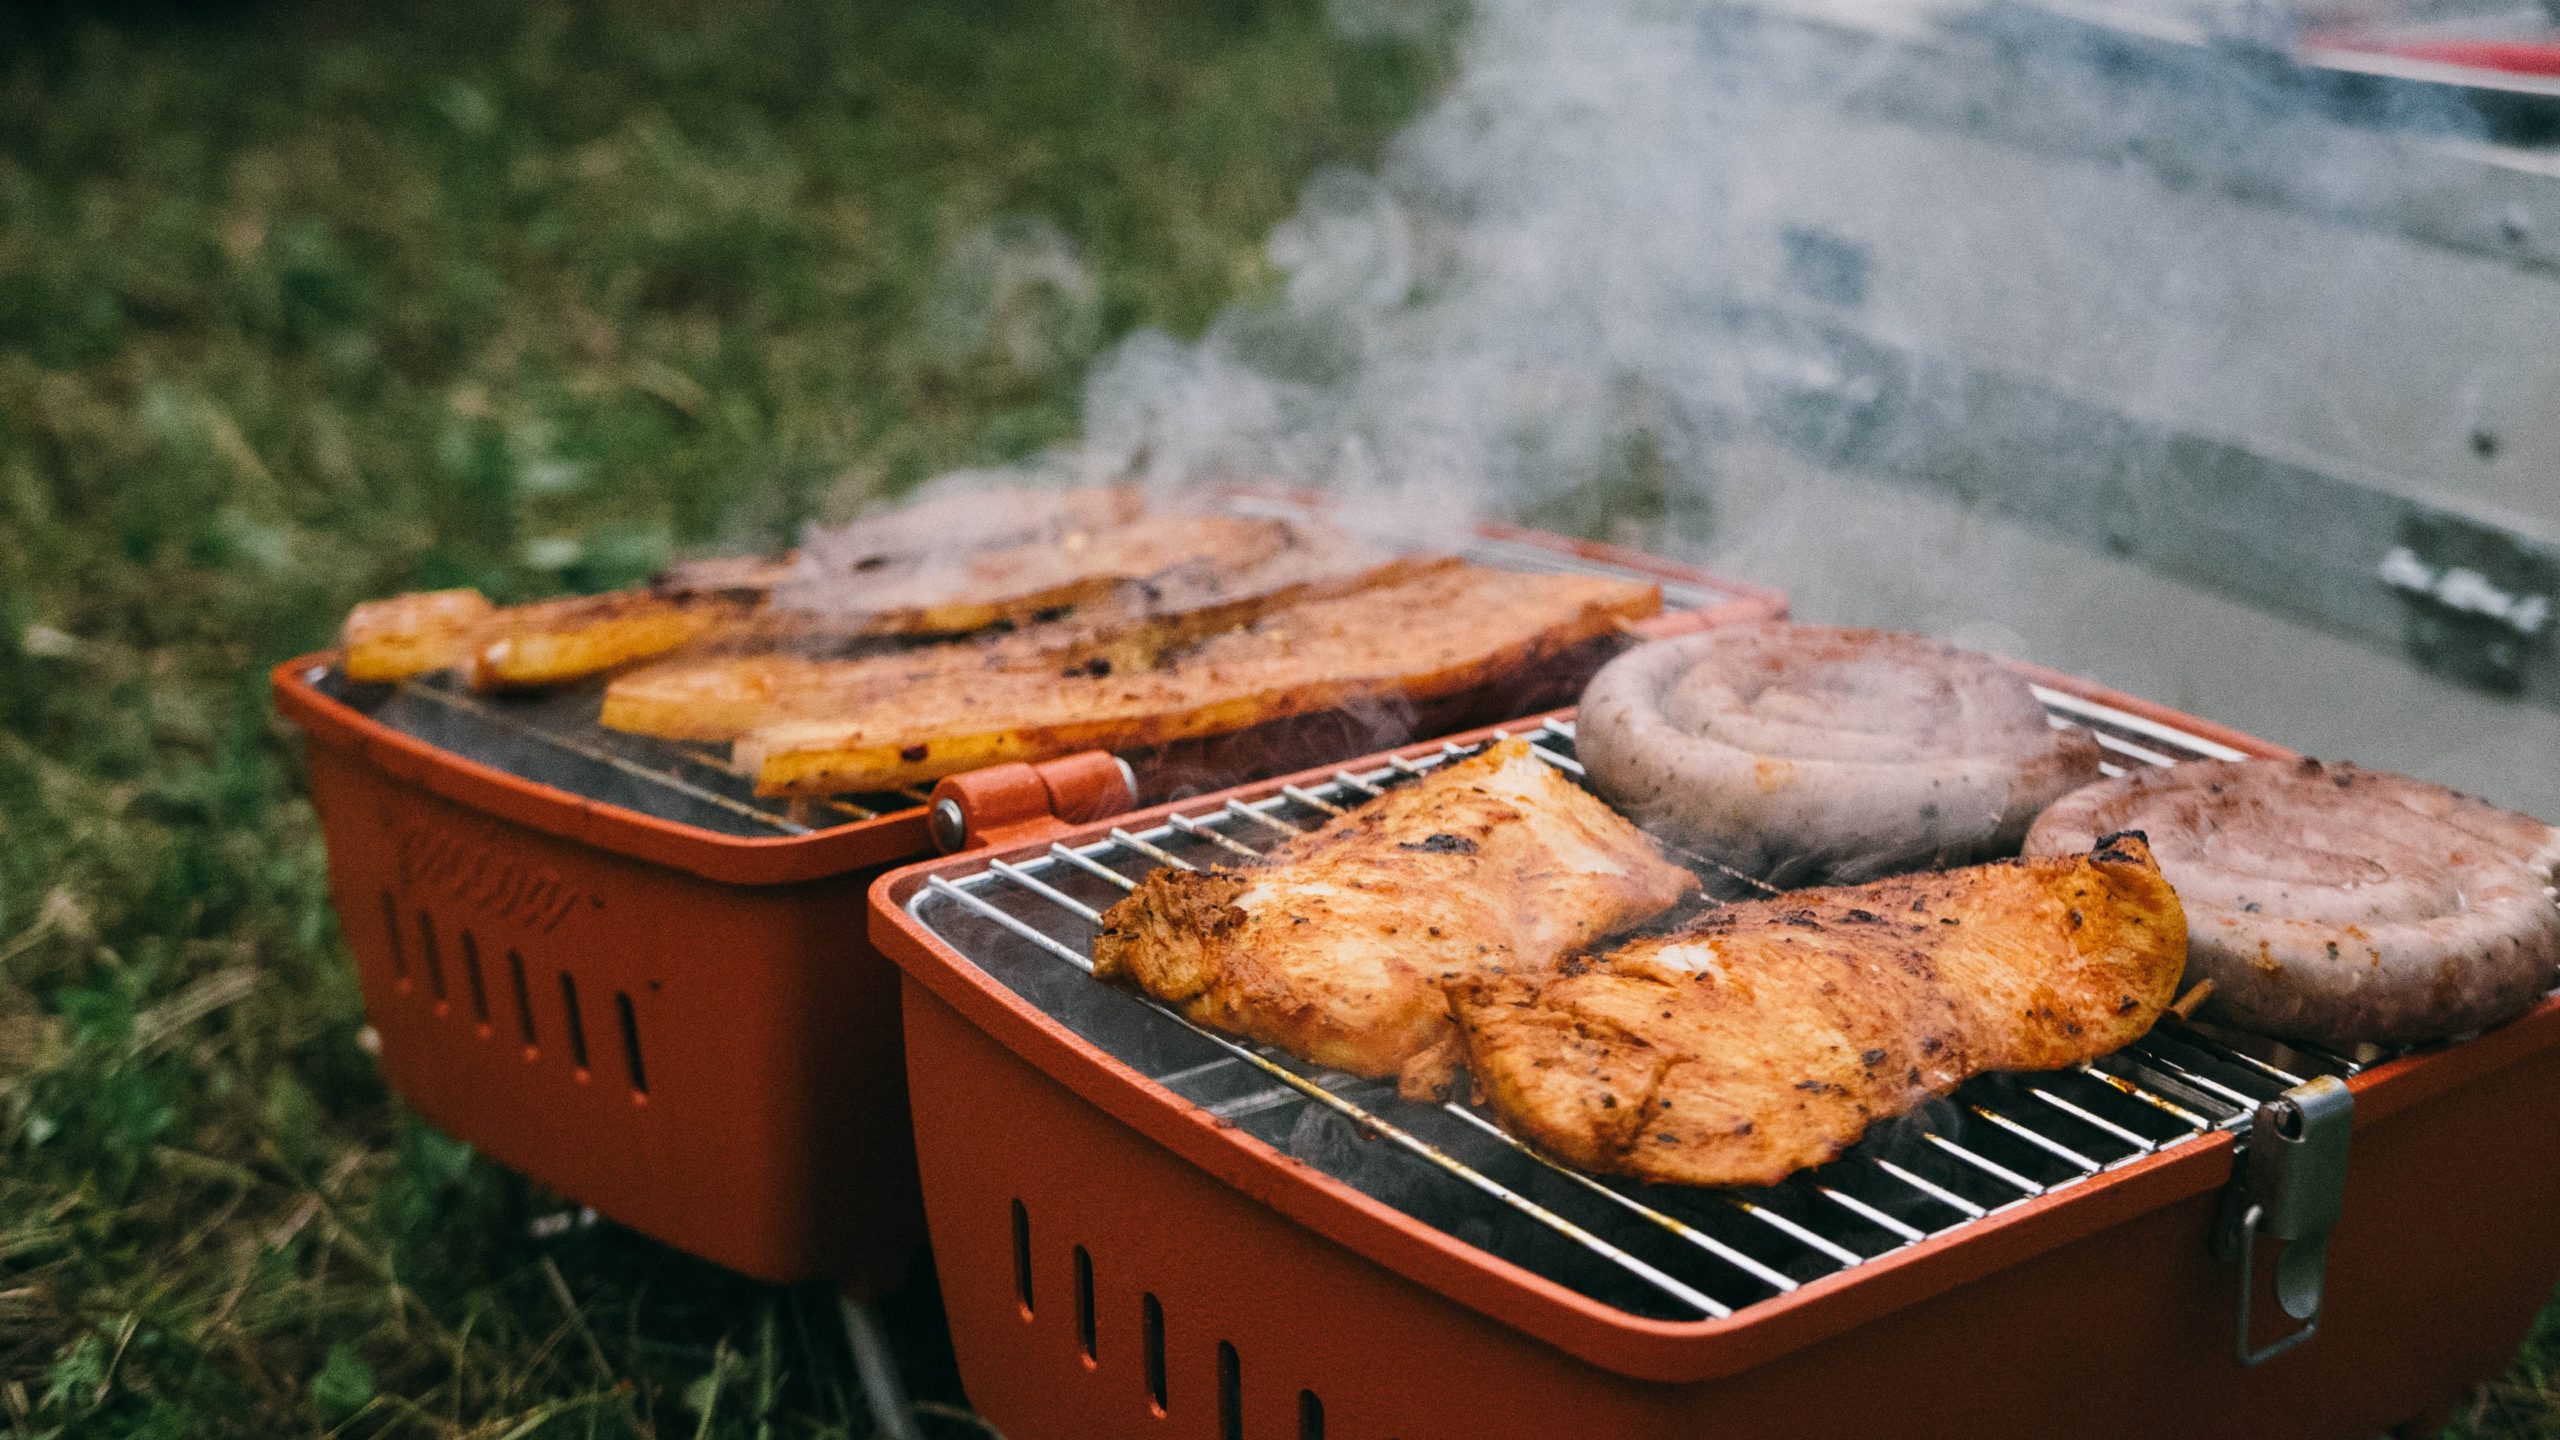 5 BBQ Tips & Tricks to Take on Your Next Camping Trip